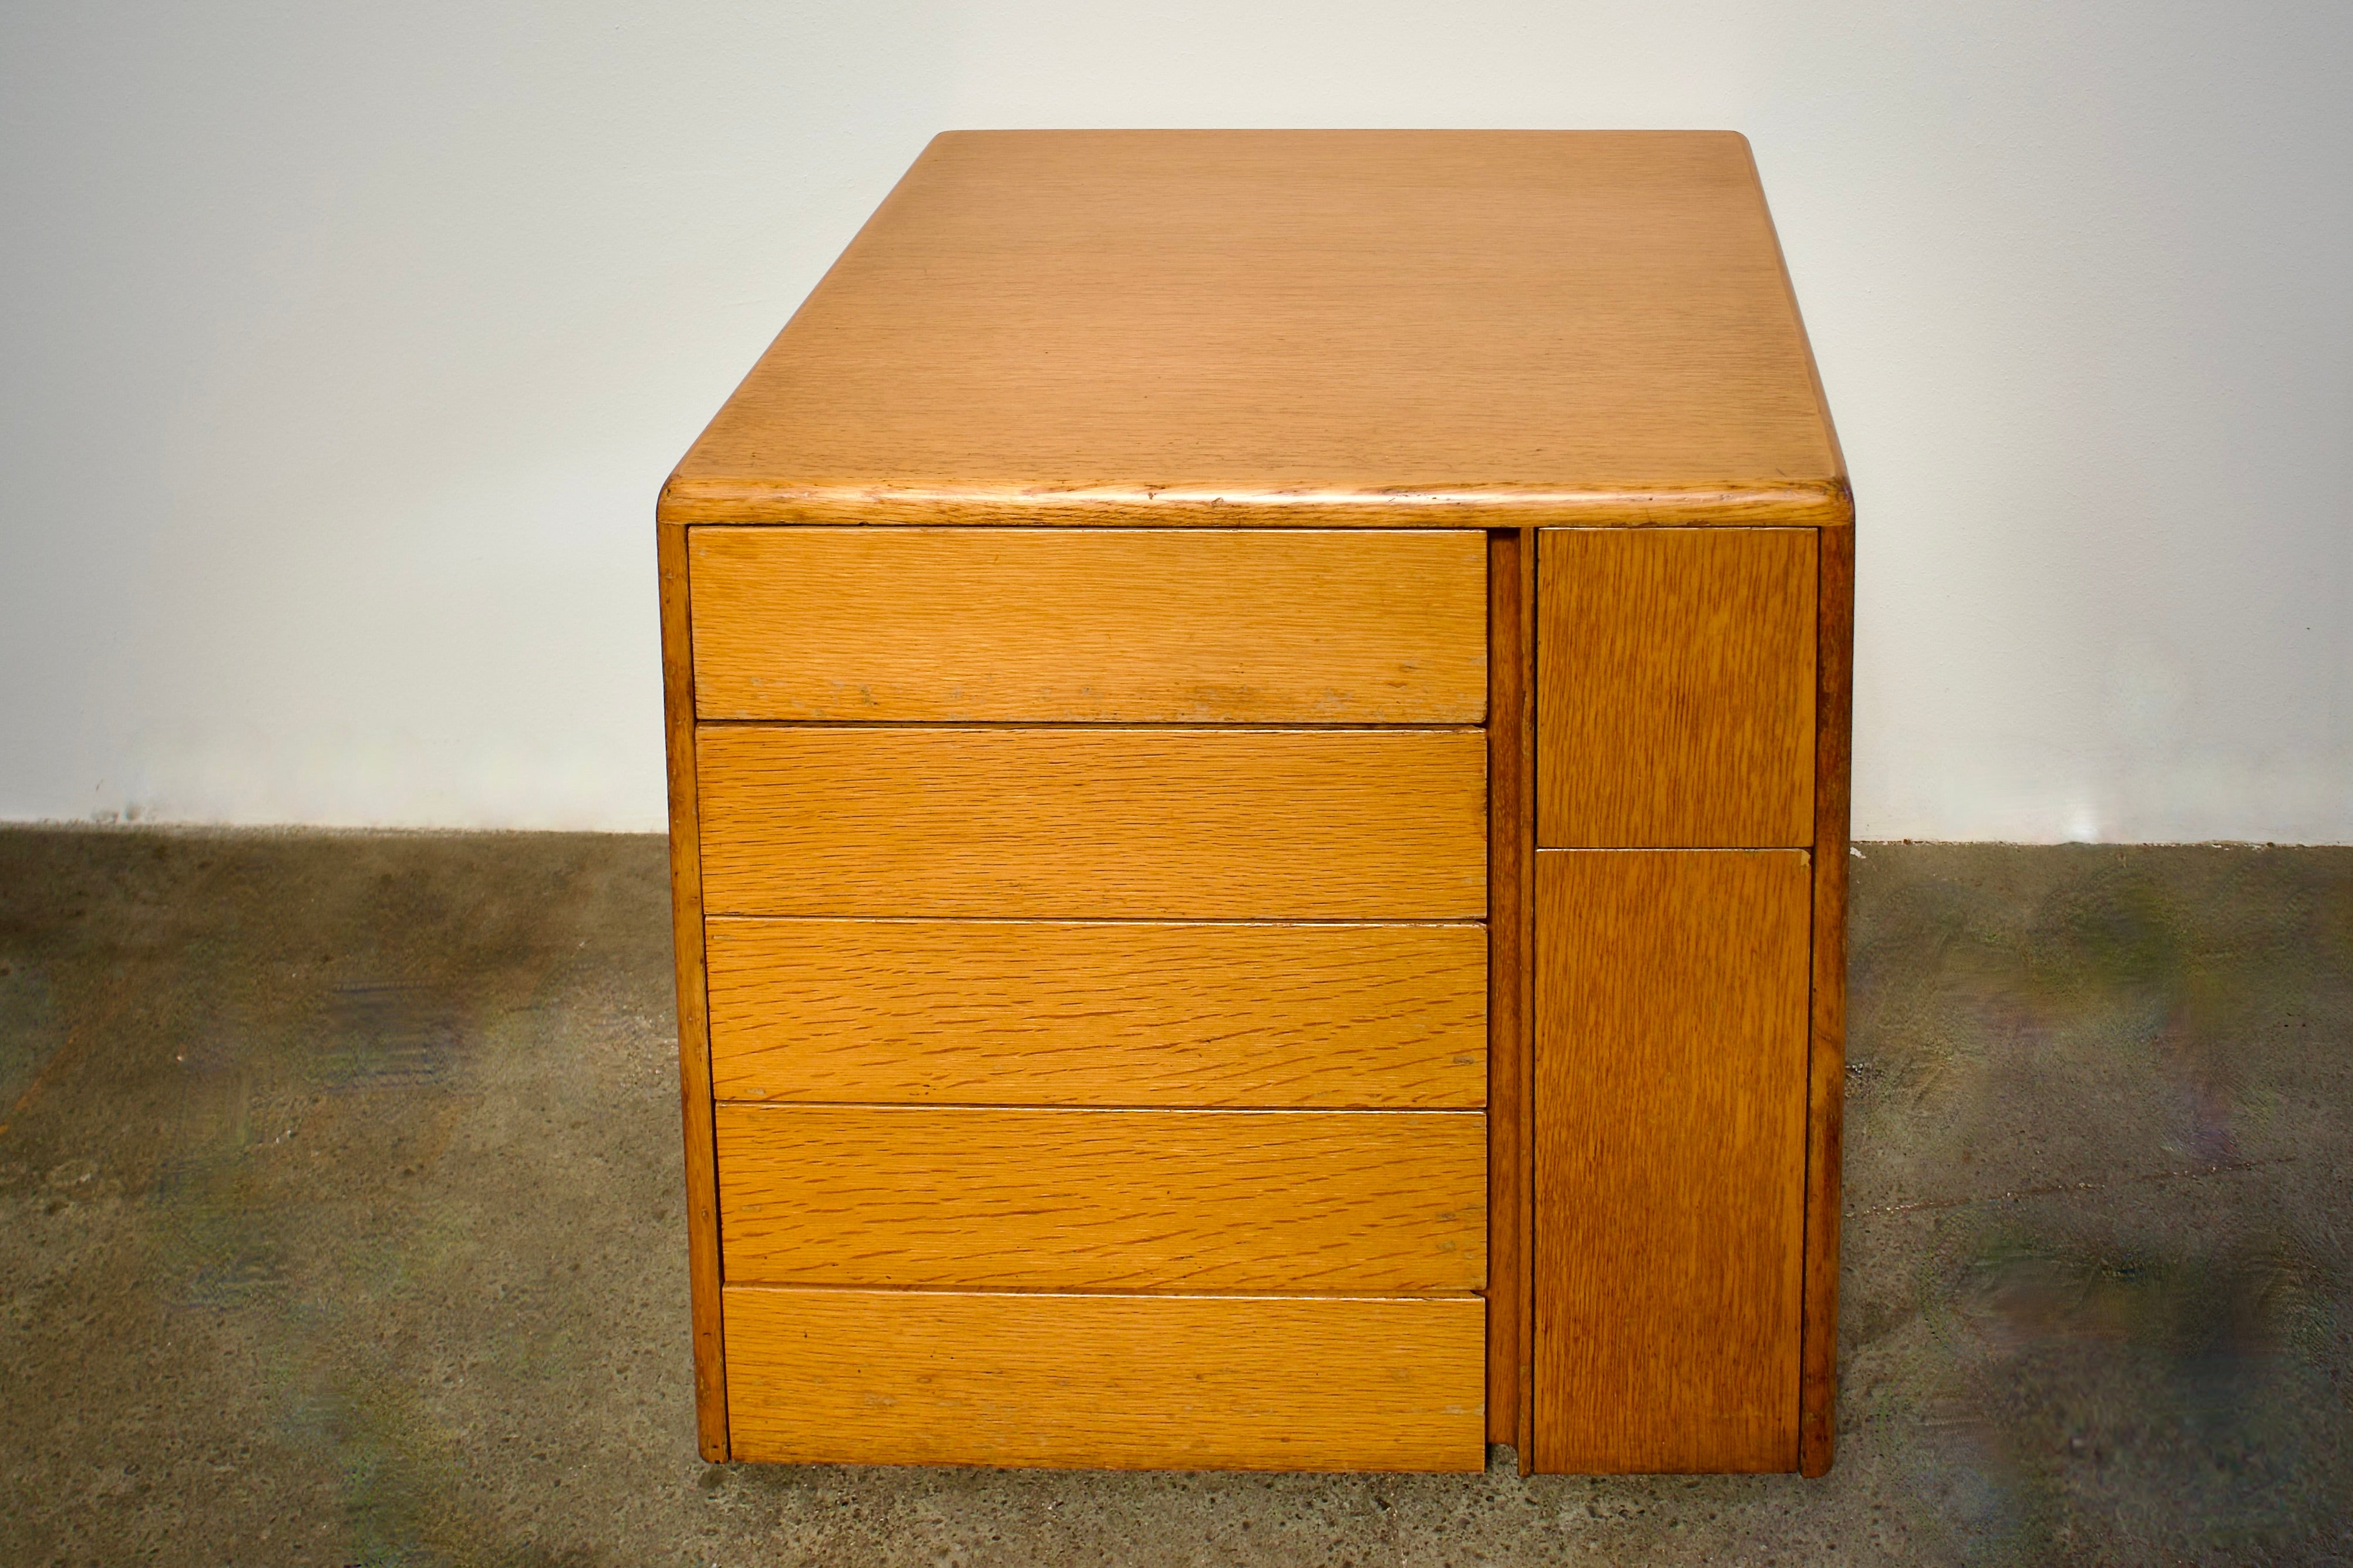 Stunning Osvaldo Borsani for Tecno Mid Century Modern low chest of drawers with integrated waste paper. Doubles as an attractive side table or sideboard. Clean lines, functional and beautiful. While it is made of solid wood and weighs 80 lbs (35kg)